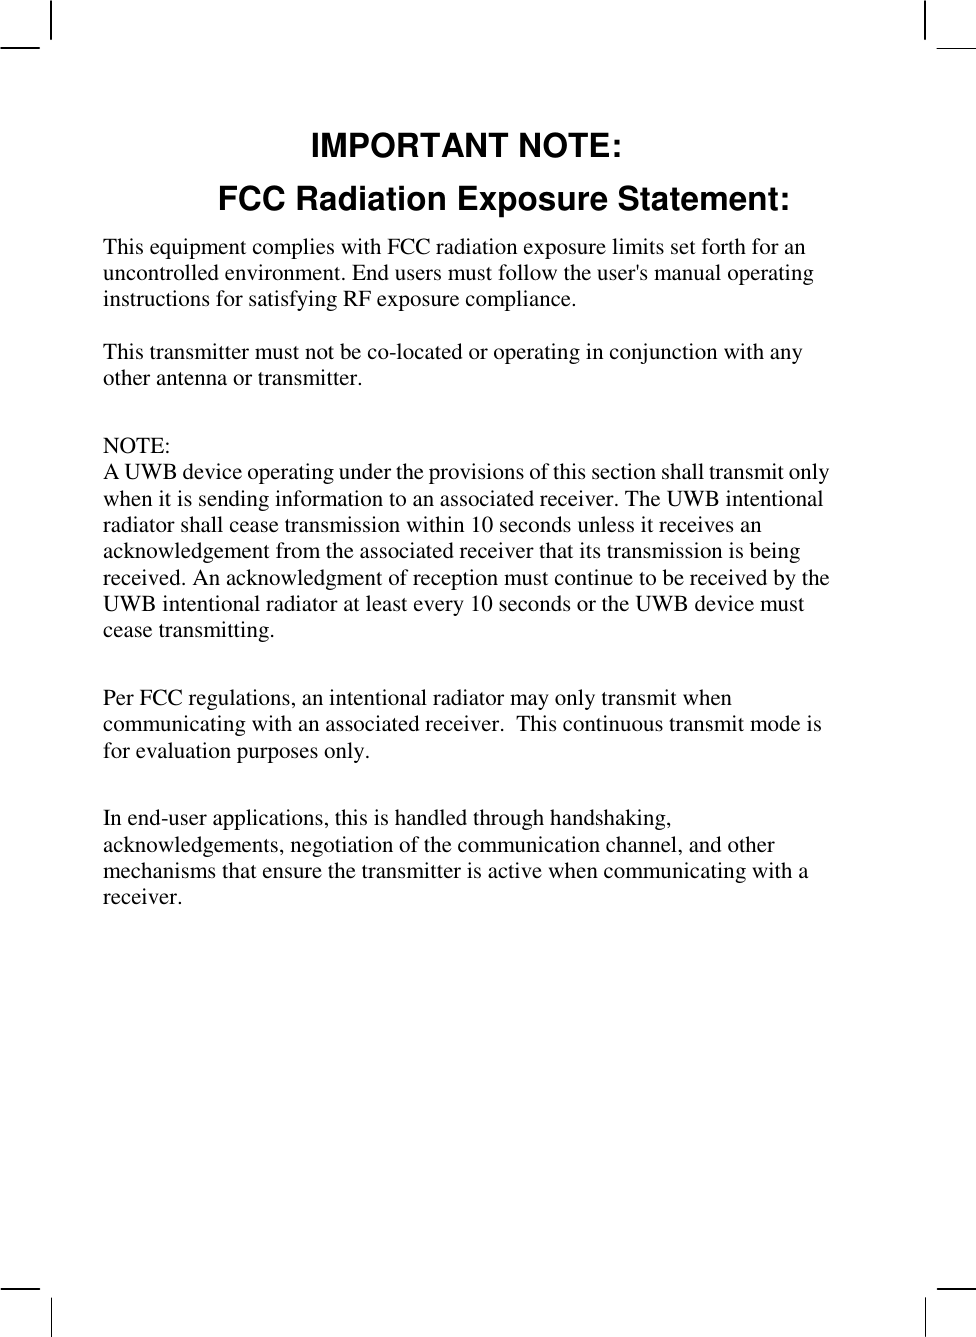   IMPORTANT NOTE: FCC Radiation Exposure Statement: This equipment complies with FCC radiation exposure limits set forth for an uncontrolled environment. End users must follow the user&apos;s manual operating instructions for satisfying RF exposure compliance.  This transmitter must not be co-located or operating in conjunction with any other antenna or transmitter.  NOTE:  A UWB device operating under the provisions of this section shall transmit only when it is sending information to an associated receiver. The UWB intentional radiator shall cease transmission within 10 seconds unless it receives an acknowledgement from the associated receiver that its transmission is being received. An acknowledgment of reception must continue to be received by the UWB intentional radiator at least every 10 seconds or the UWB device must cease transmitting.  Per FCC regulations, an intentional radiator may only transmit when communicating with an associated receiver.  This continuous transmit mode is for evaluation purposes only.    In end-user applications, this is handled through handshaking, acknowledgements, negotiation of the communication channel, and other mechanisms that ensure the transmitter is active when communicating with a receiver.  